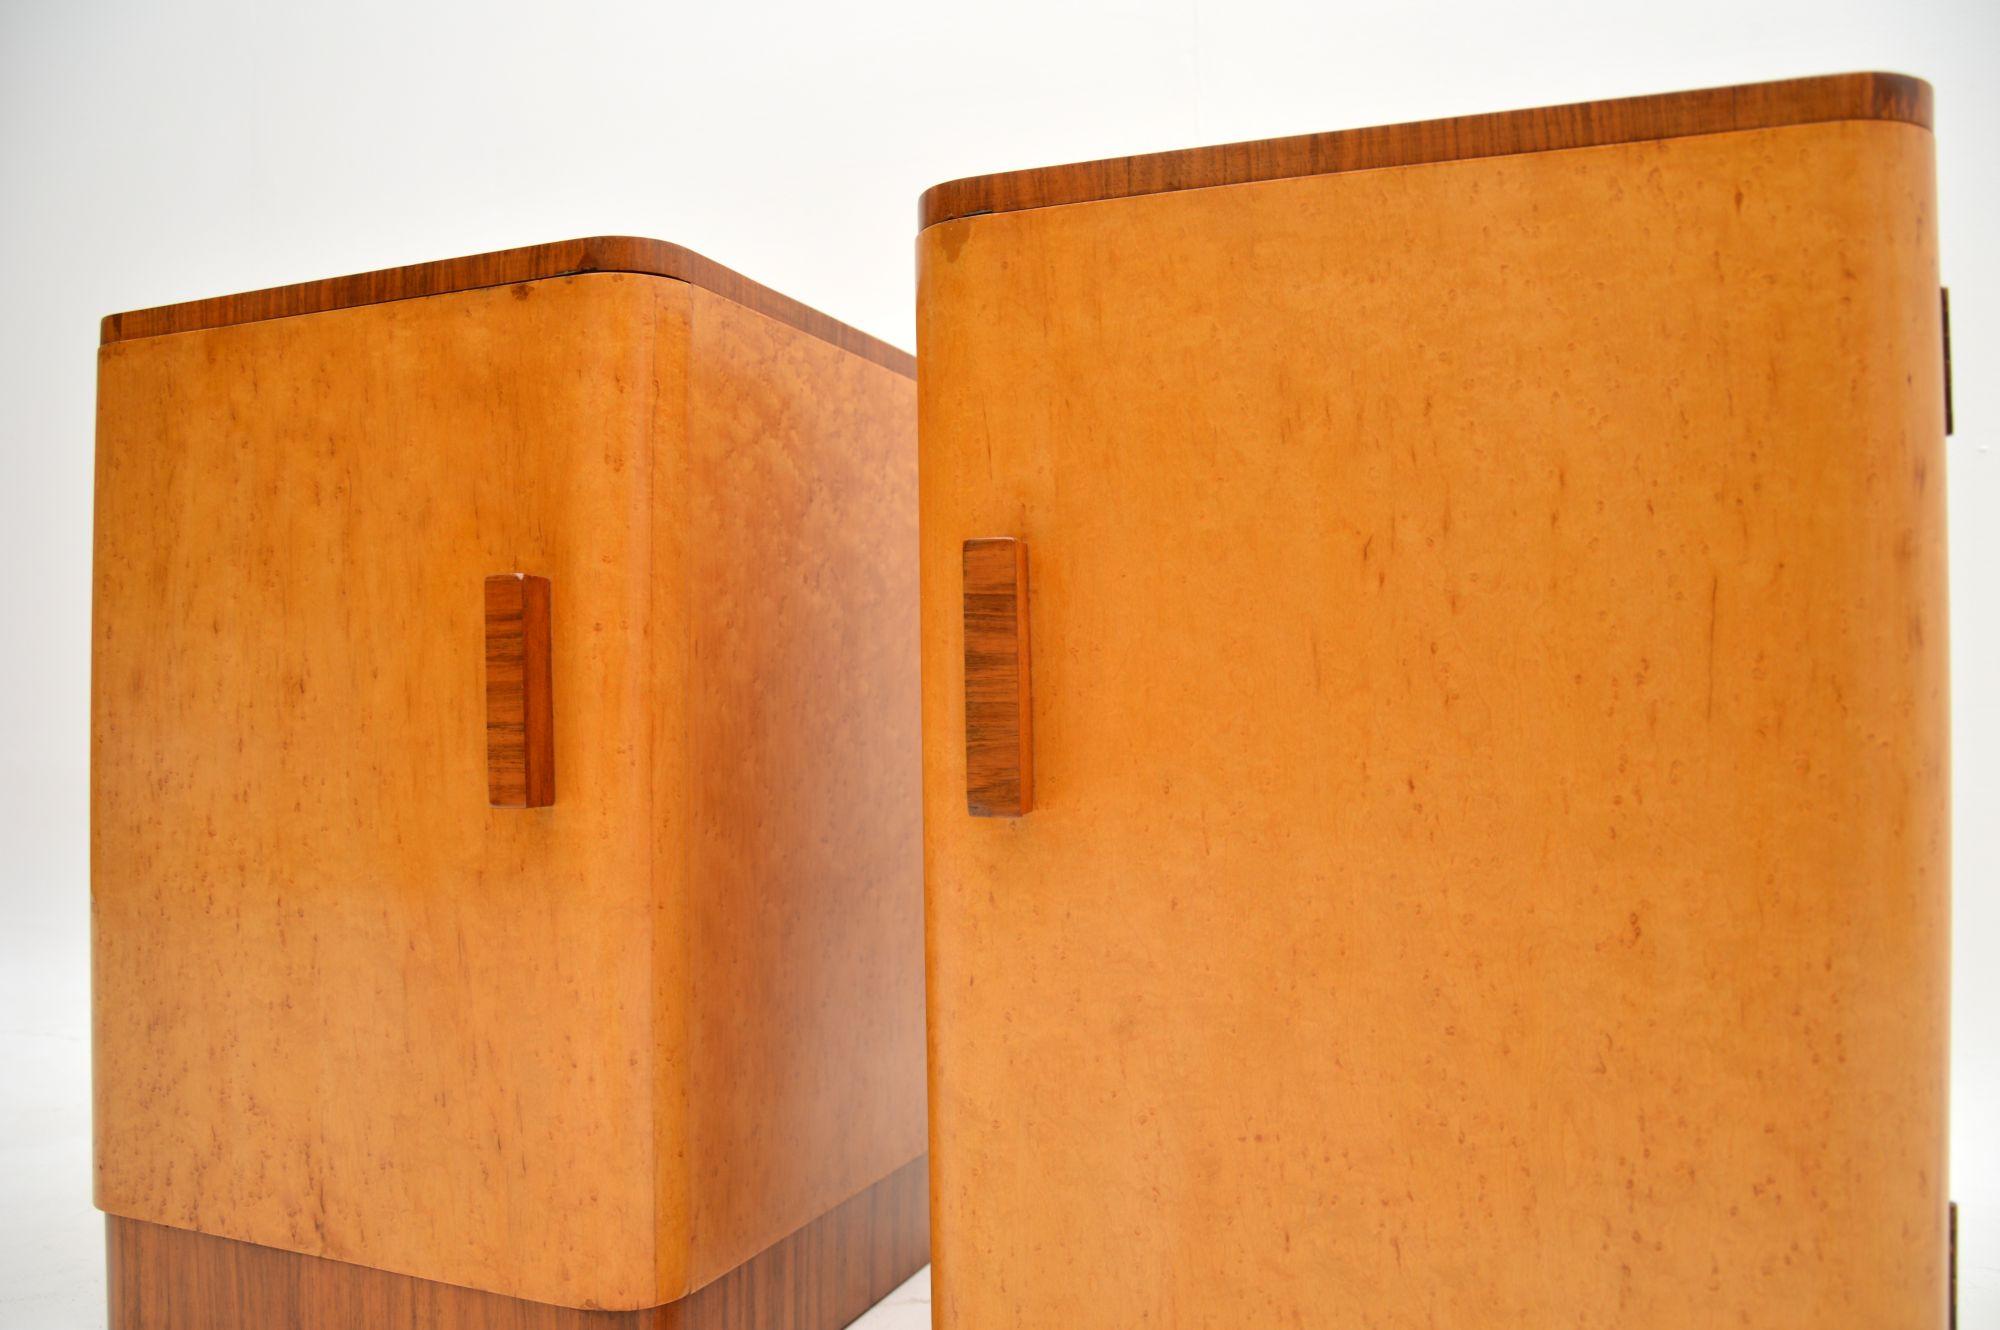 Pair of Art Deco Bedside Cabinets in Birds Eye Maple and Walnut 1